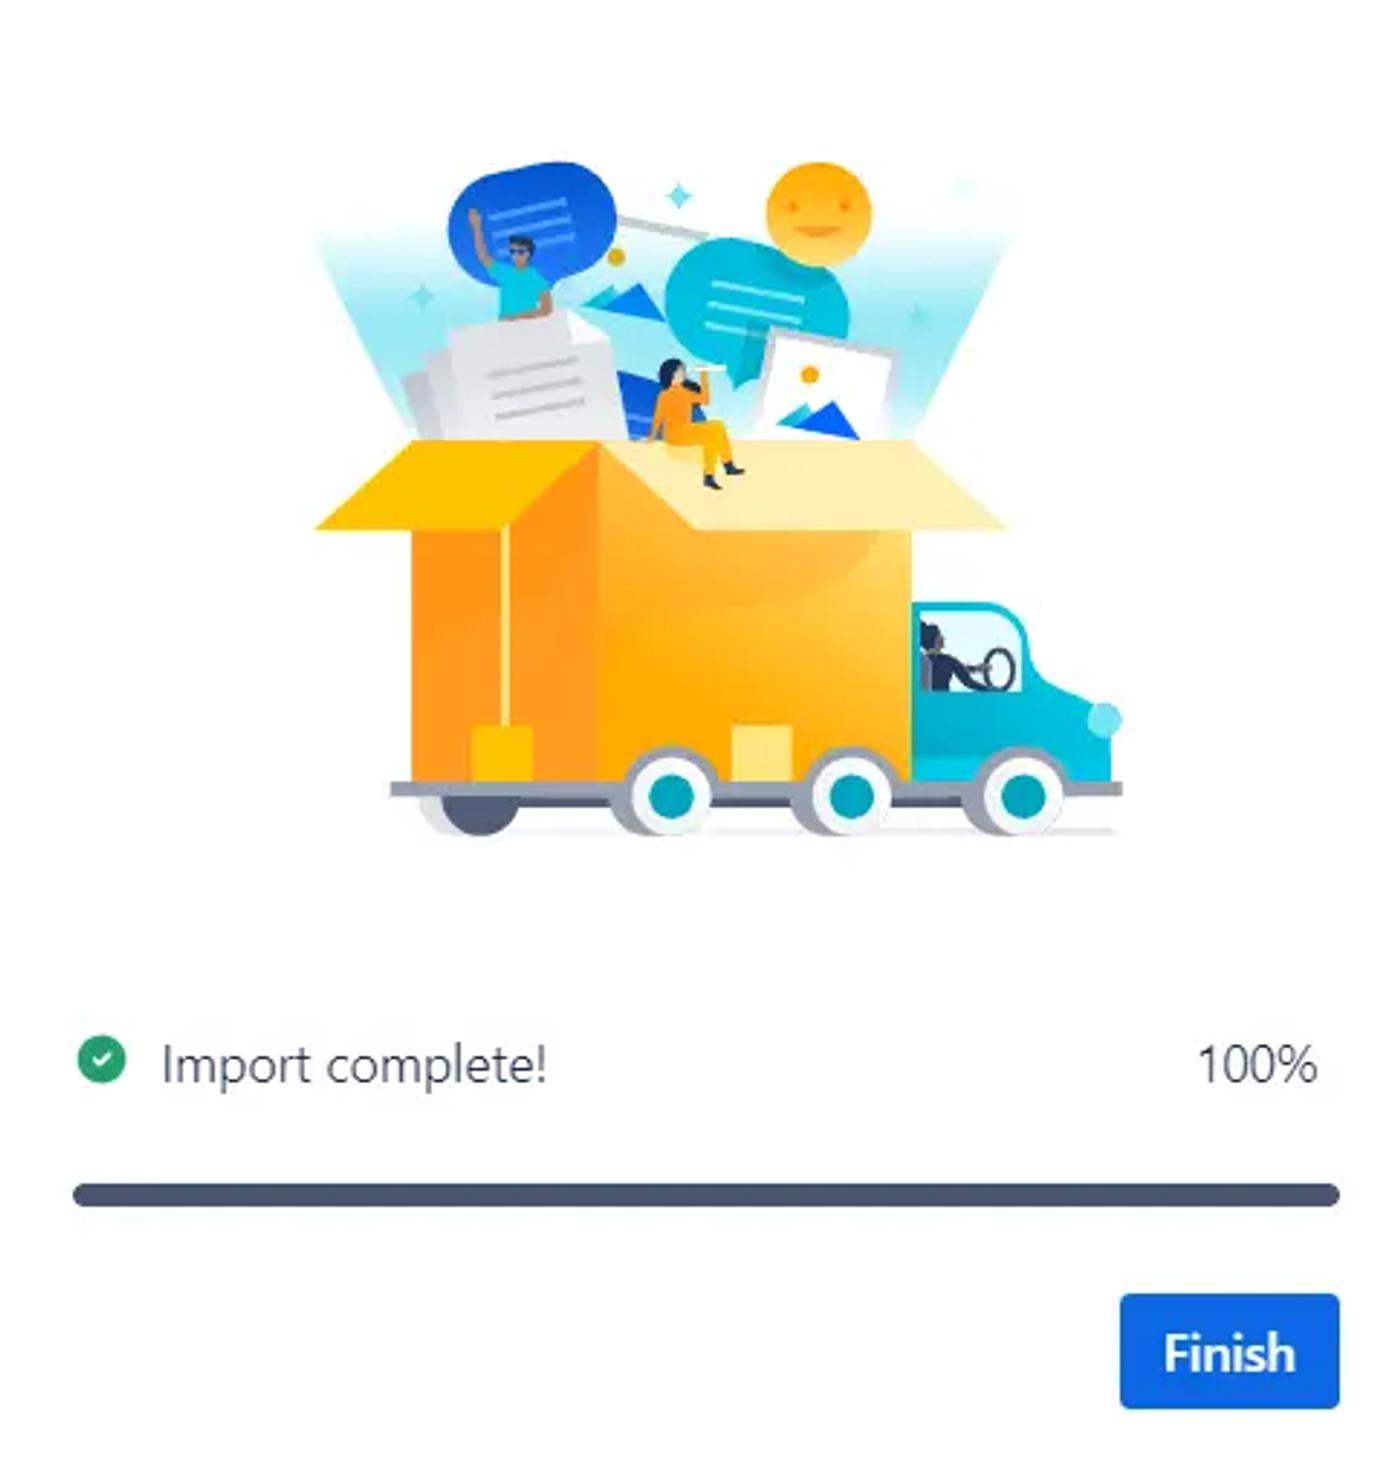 A screenshot of the progress bar and completion message for an import into Confluence